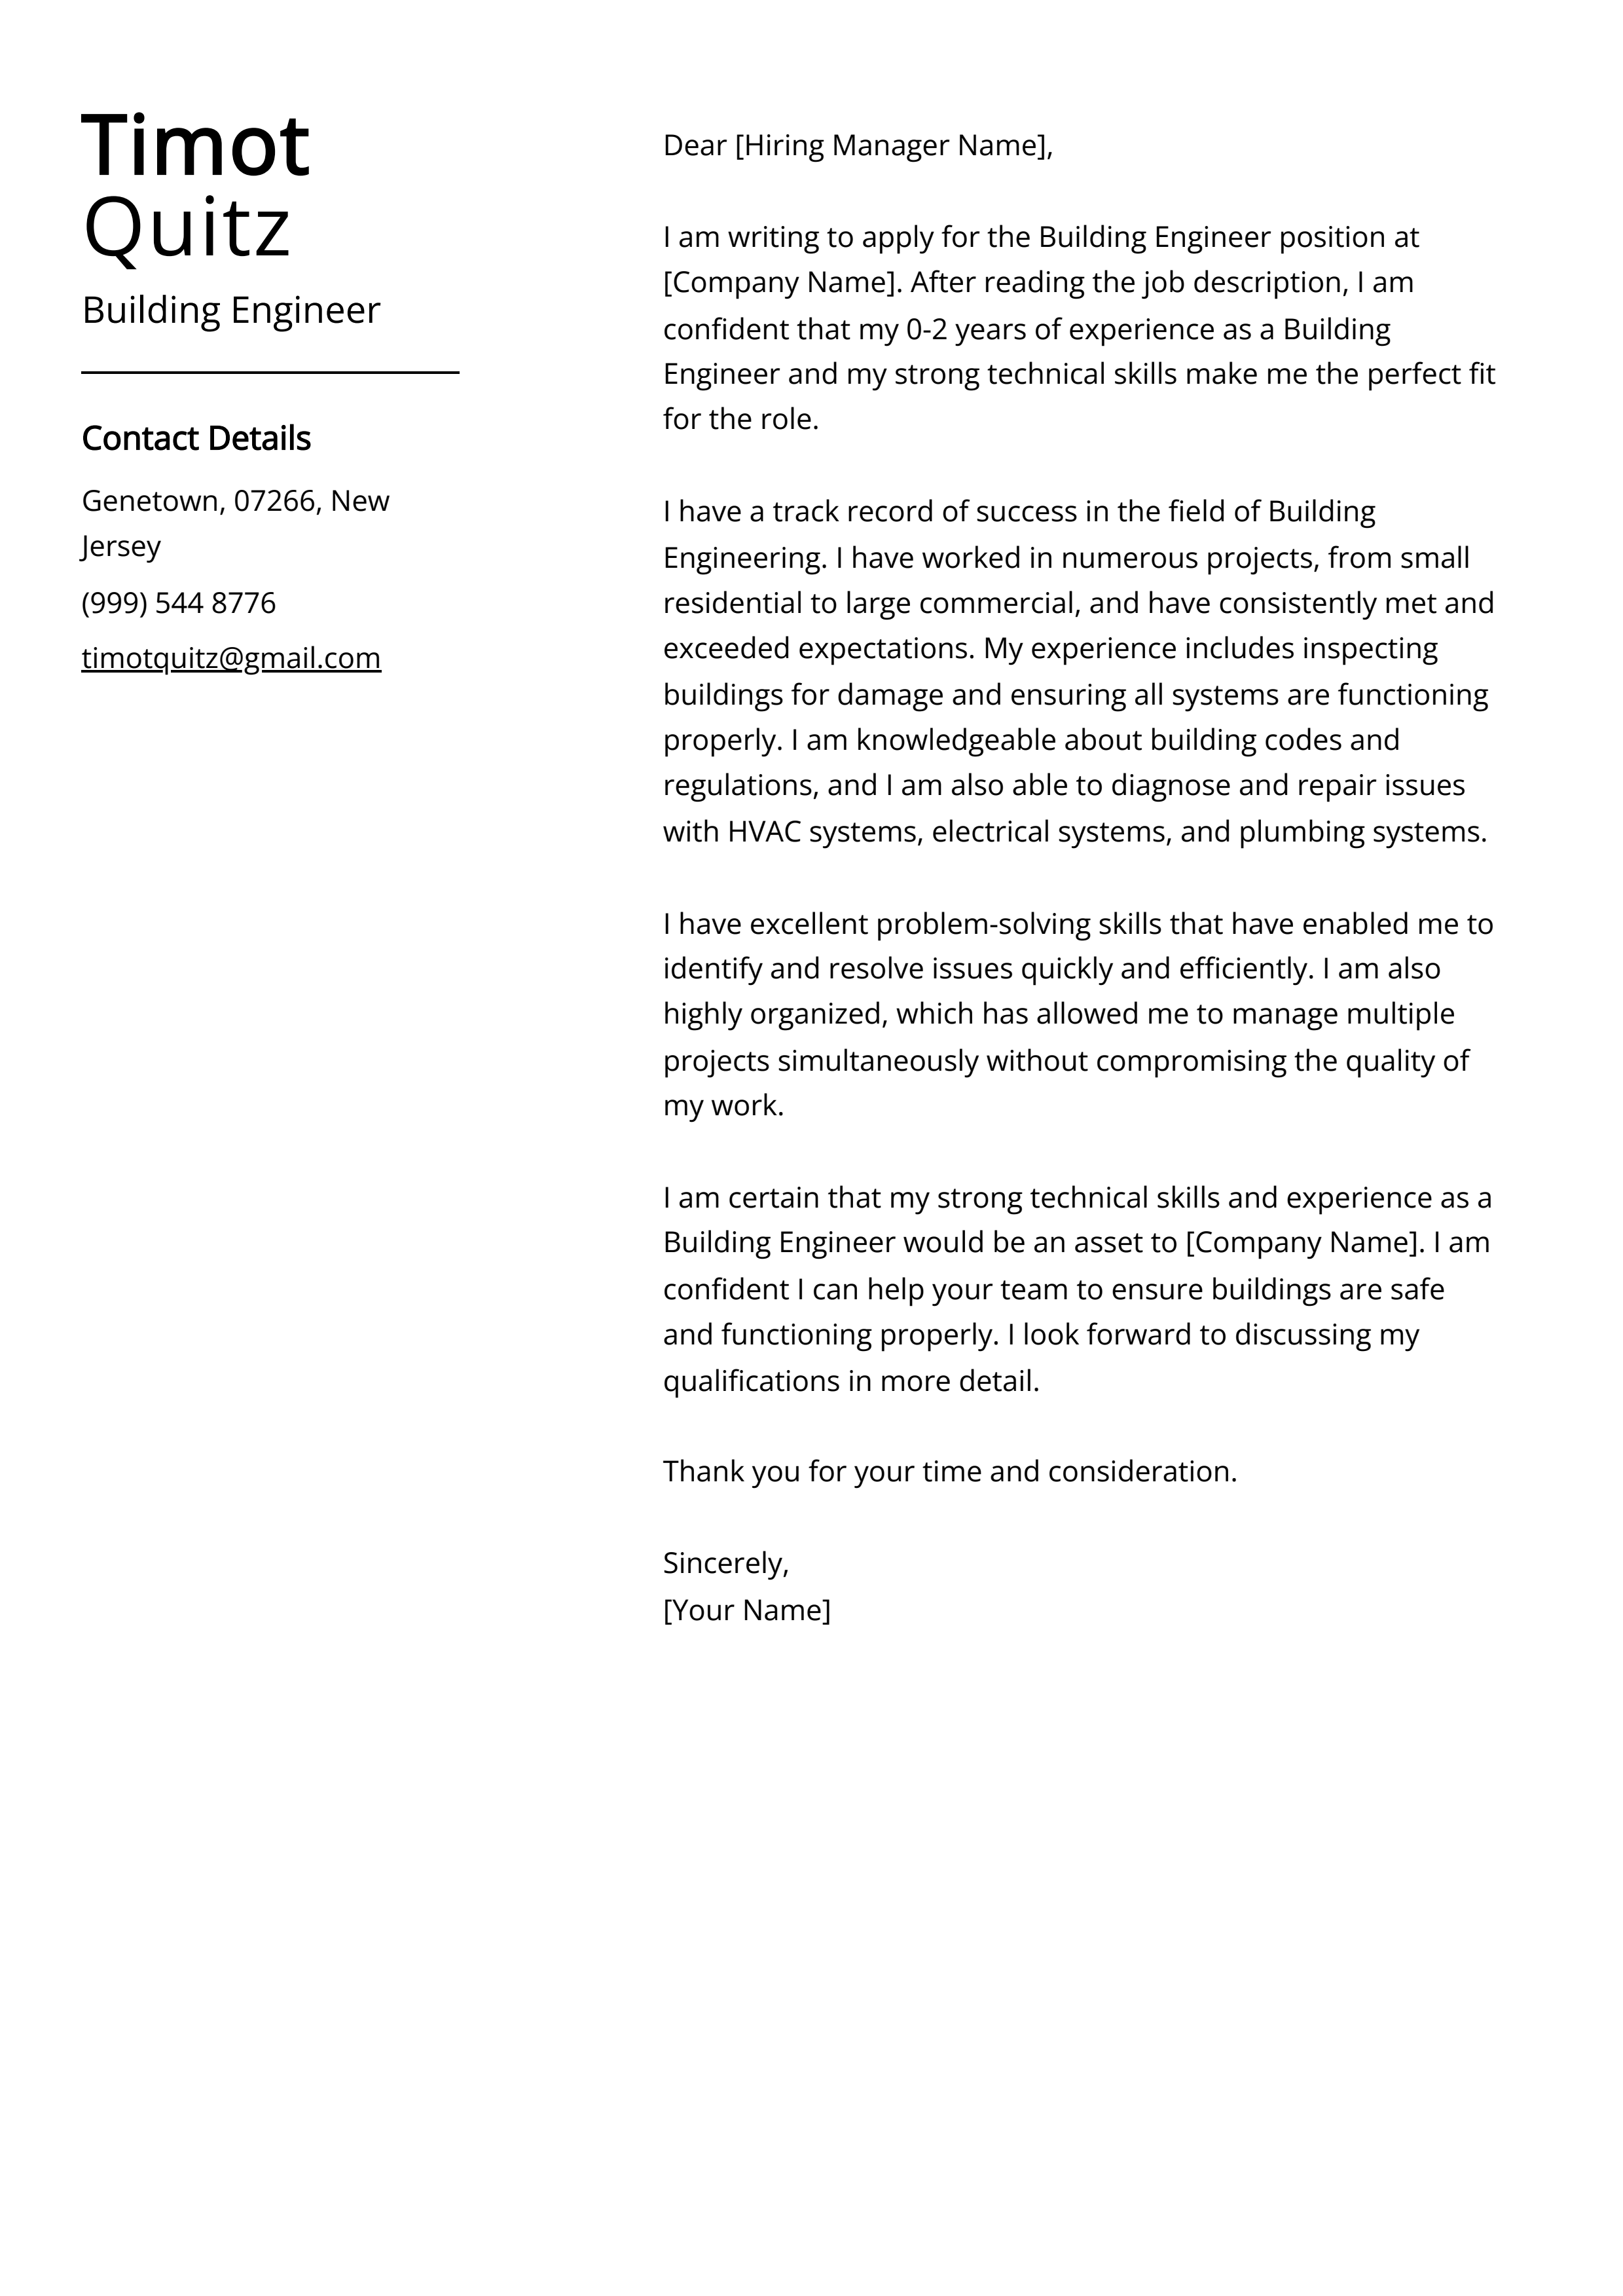 Building Engineer Cover Letter Example